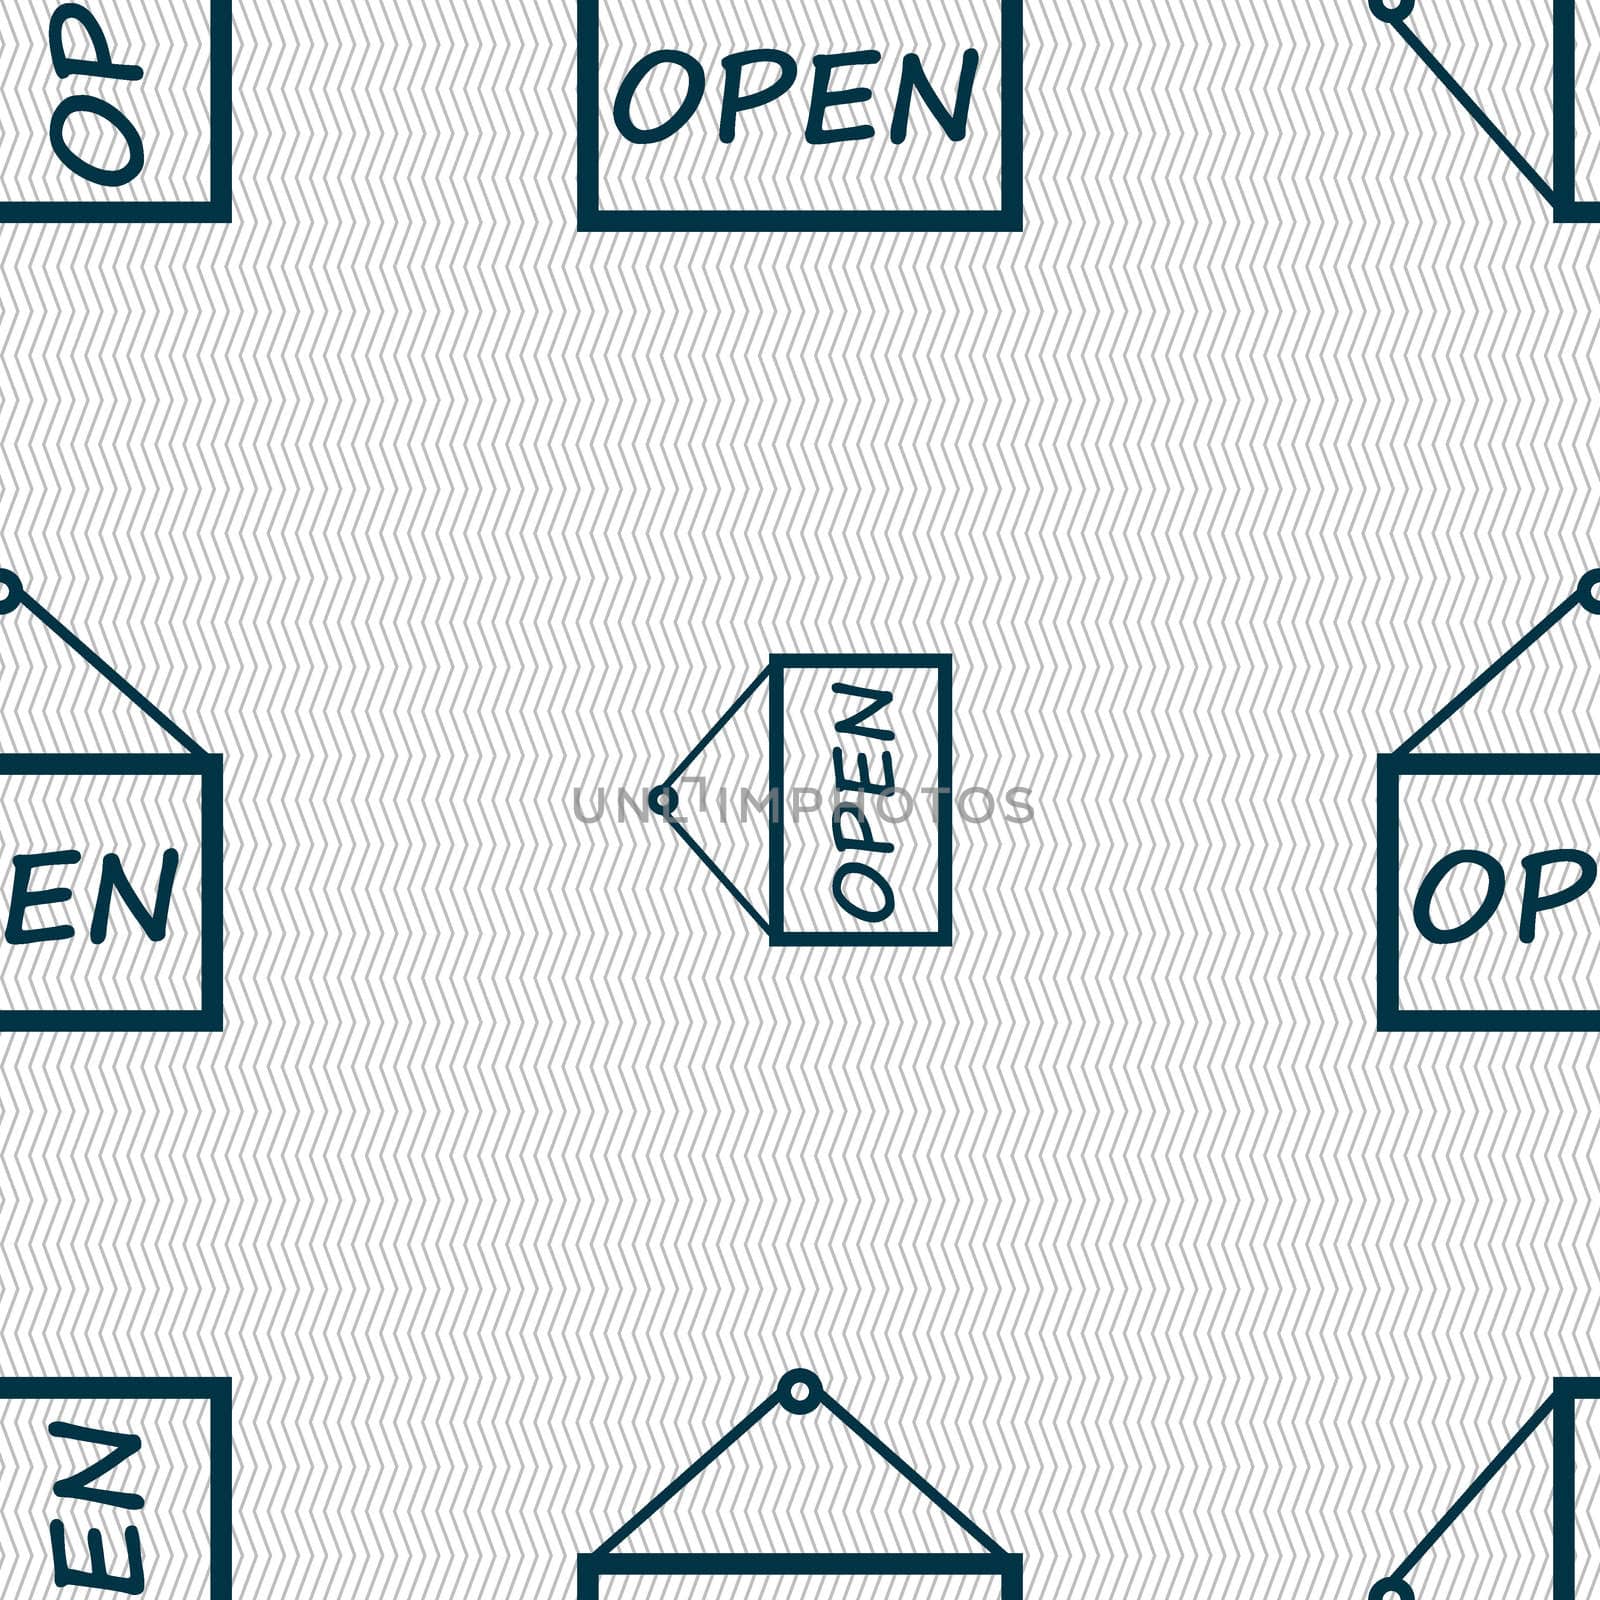 open icon sign. Seamless abstract background with geometric shapes. illustration